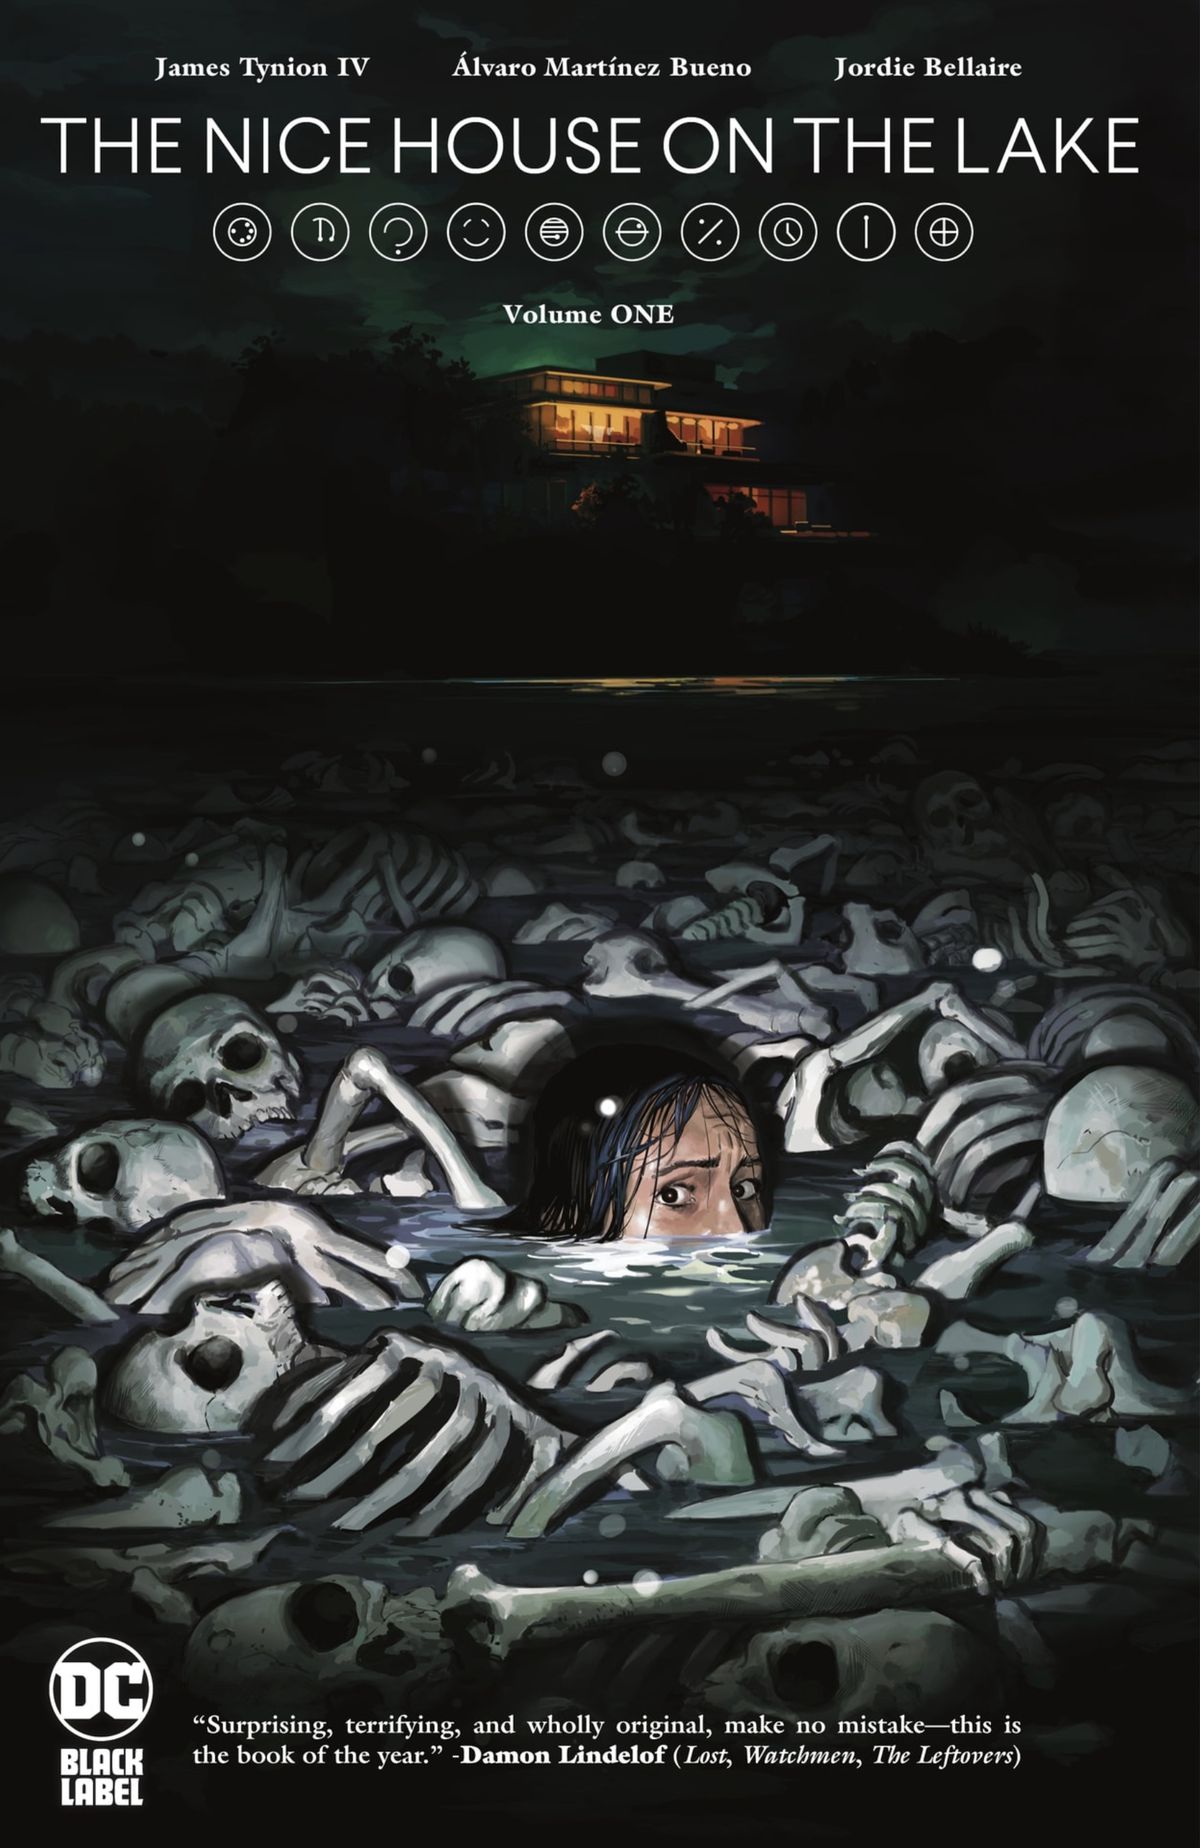 A frightened figure is submerged in a lake from their nose down. The water is full of human skeletons. In the darkness of the background, the glowing lights from a beautiful lake house can be seen. 